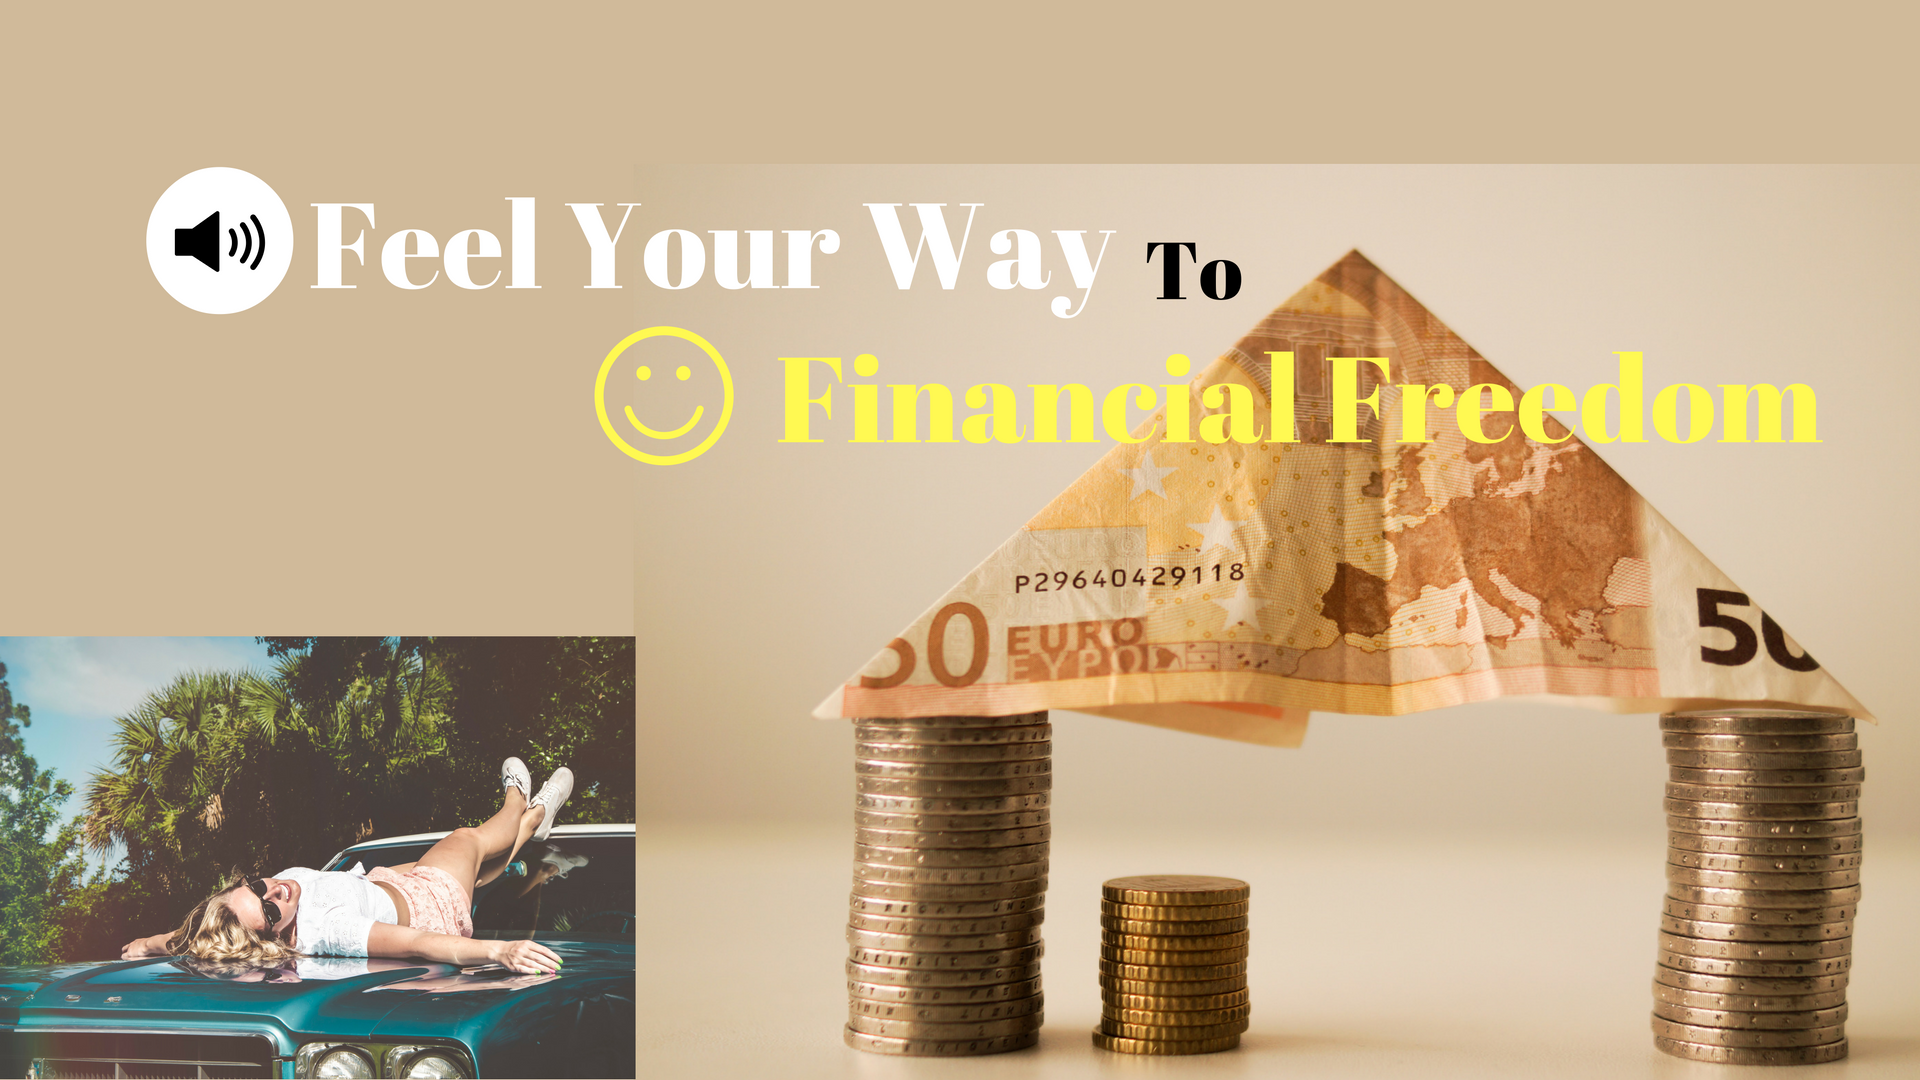 Feel Your Way to Financial Freedom